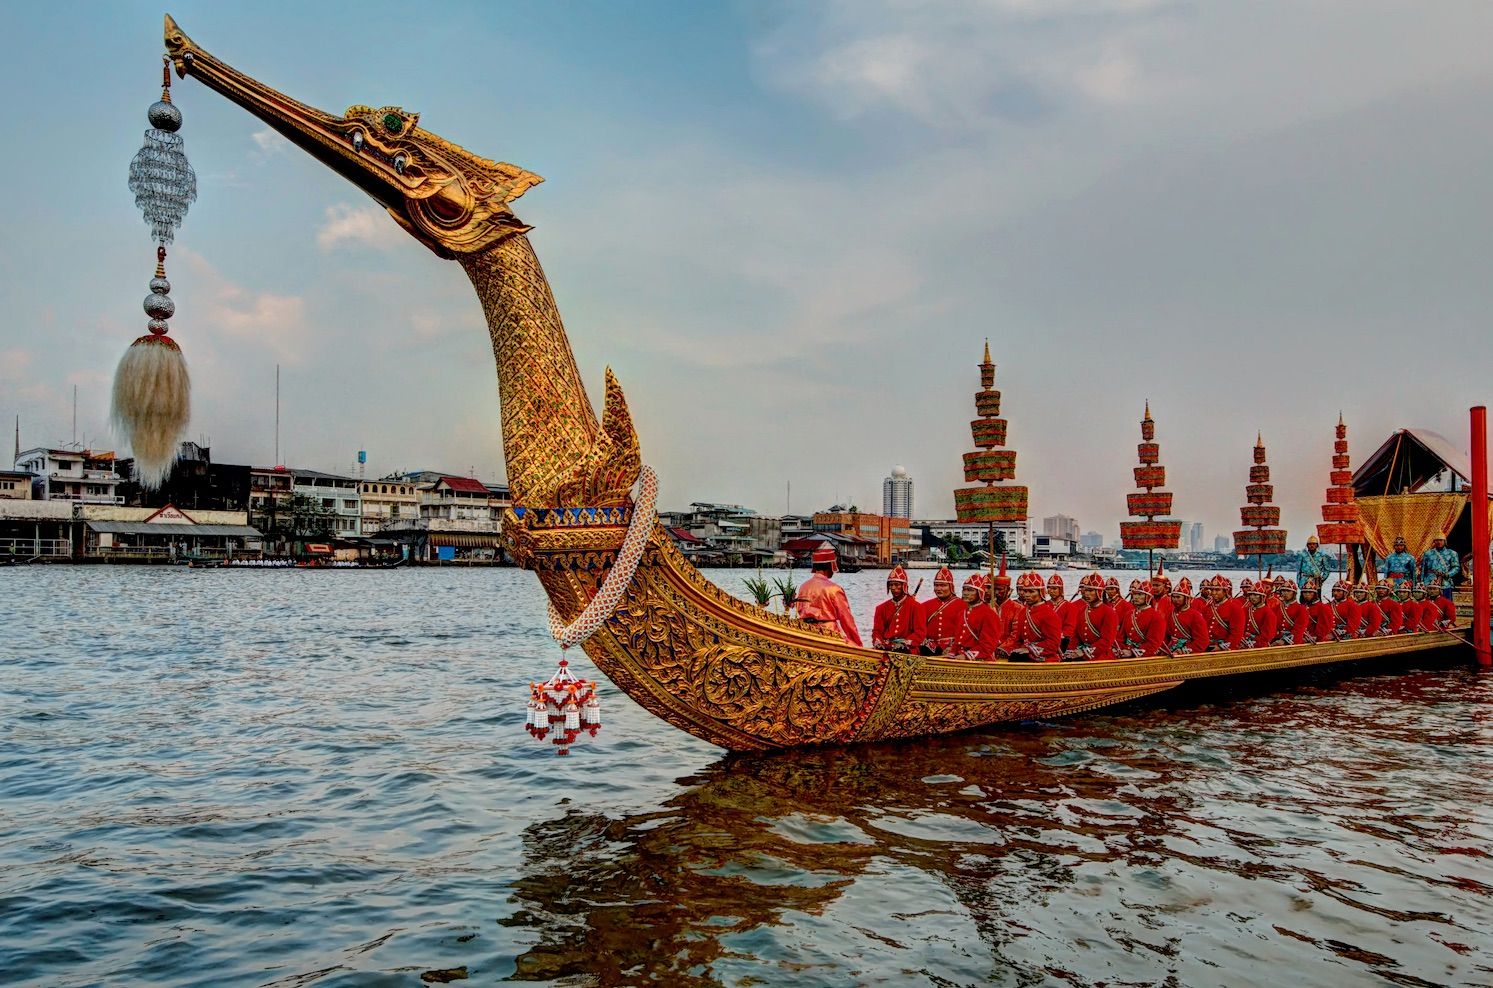 Find Out All About the Upcoming Royal Barge Procession at Iconsiam’s New Exhibit